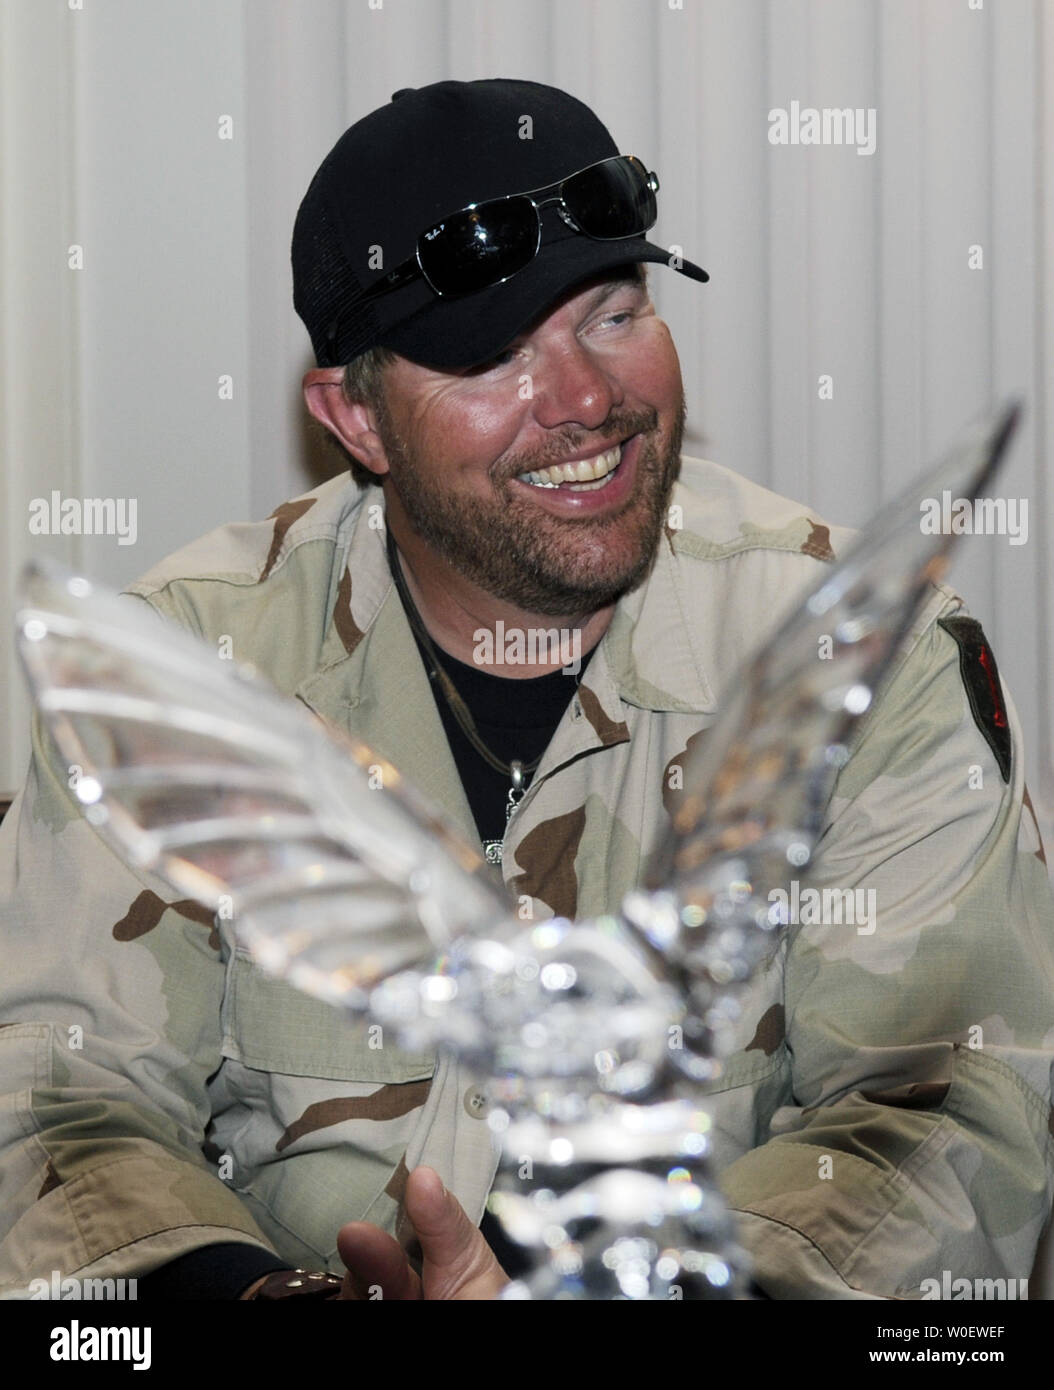 Country's Toby Keith will be singing for the soldiers